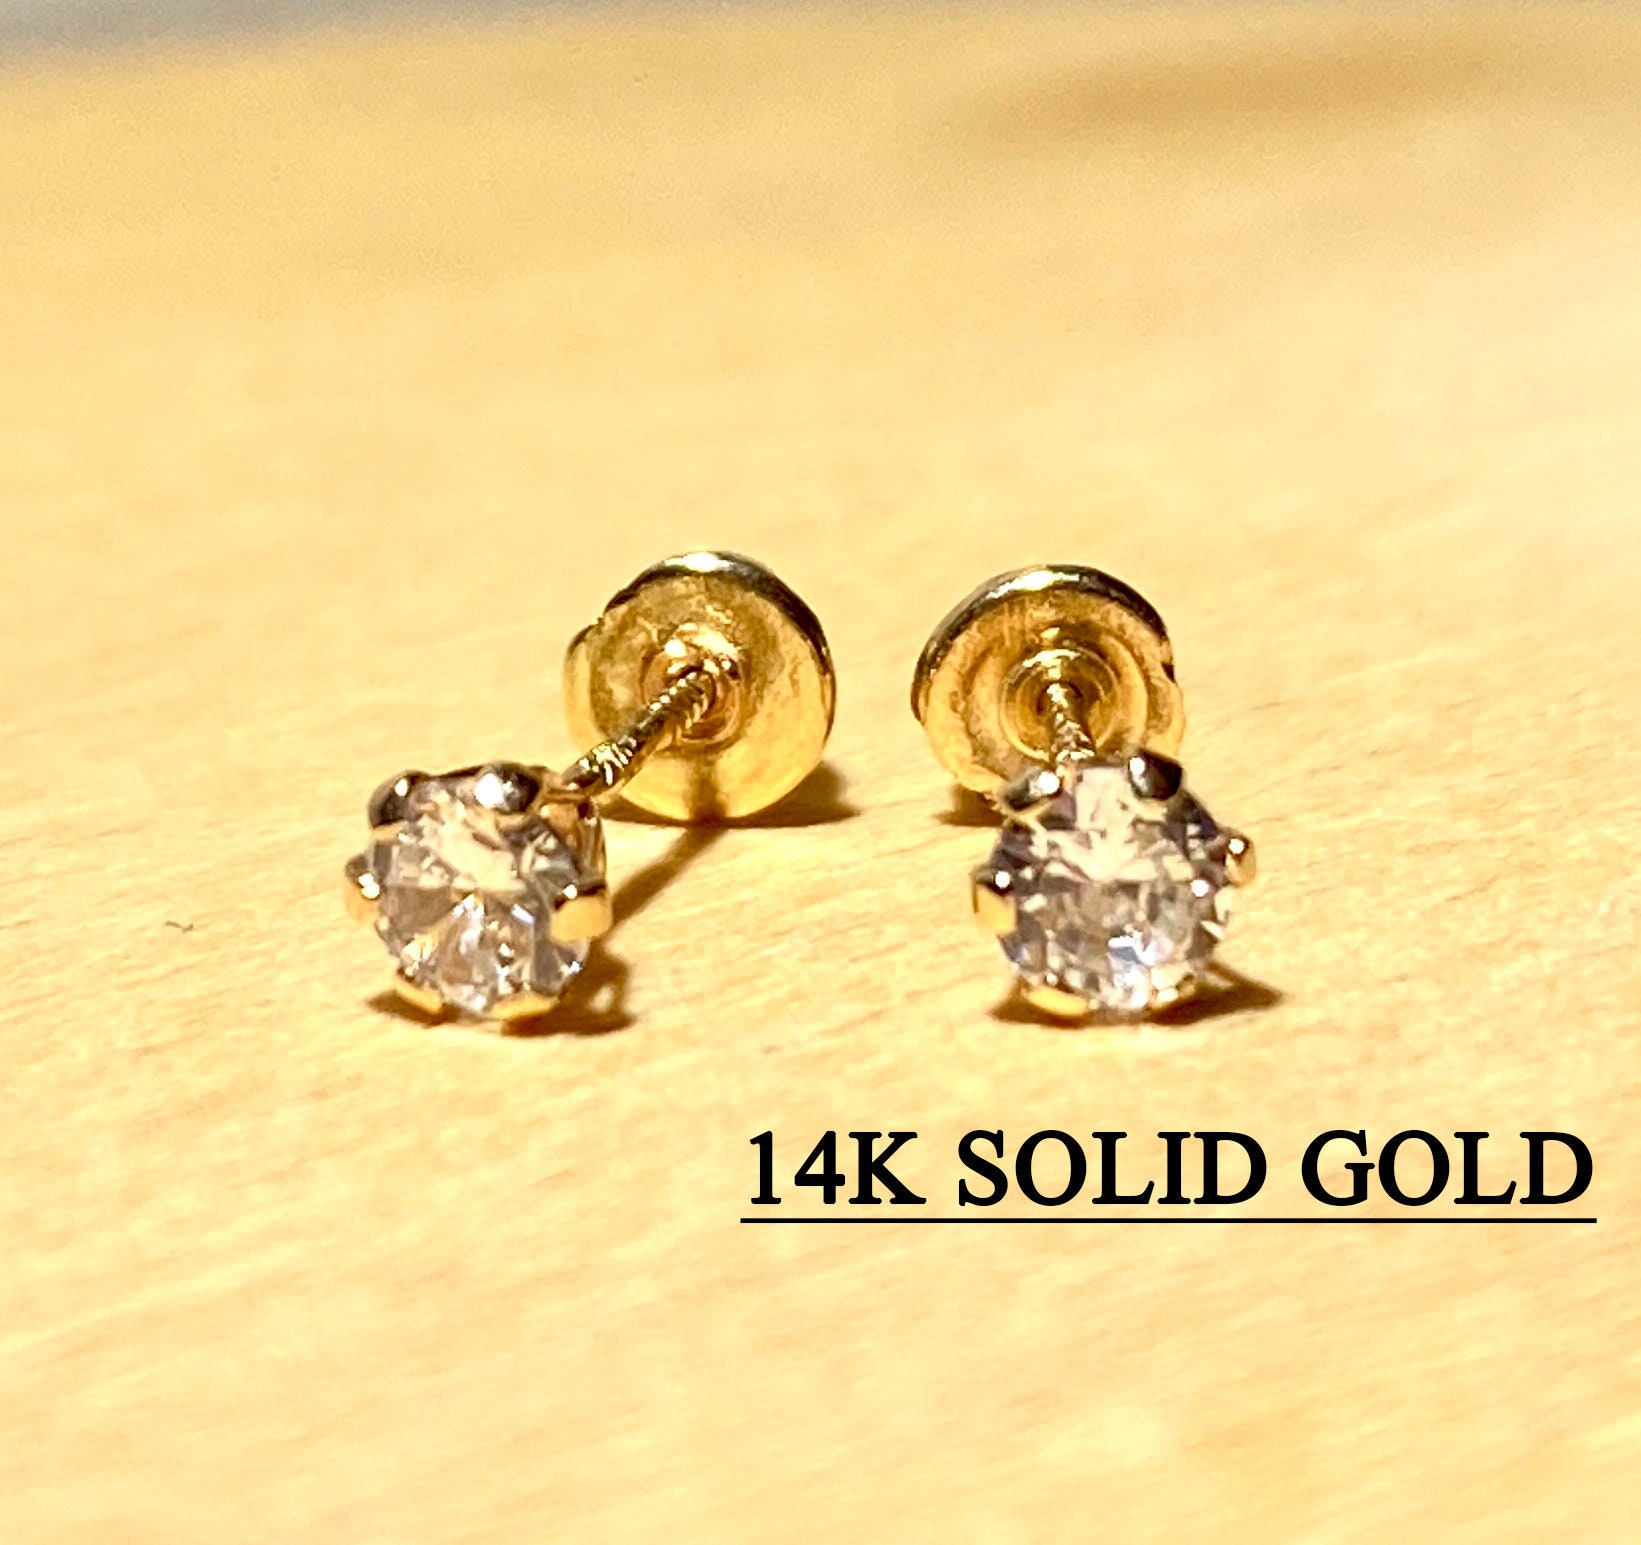 Clear Earring Backs - 4mm - 20g or 714 Pieces - Z1485